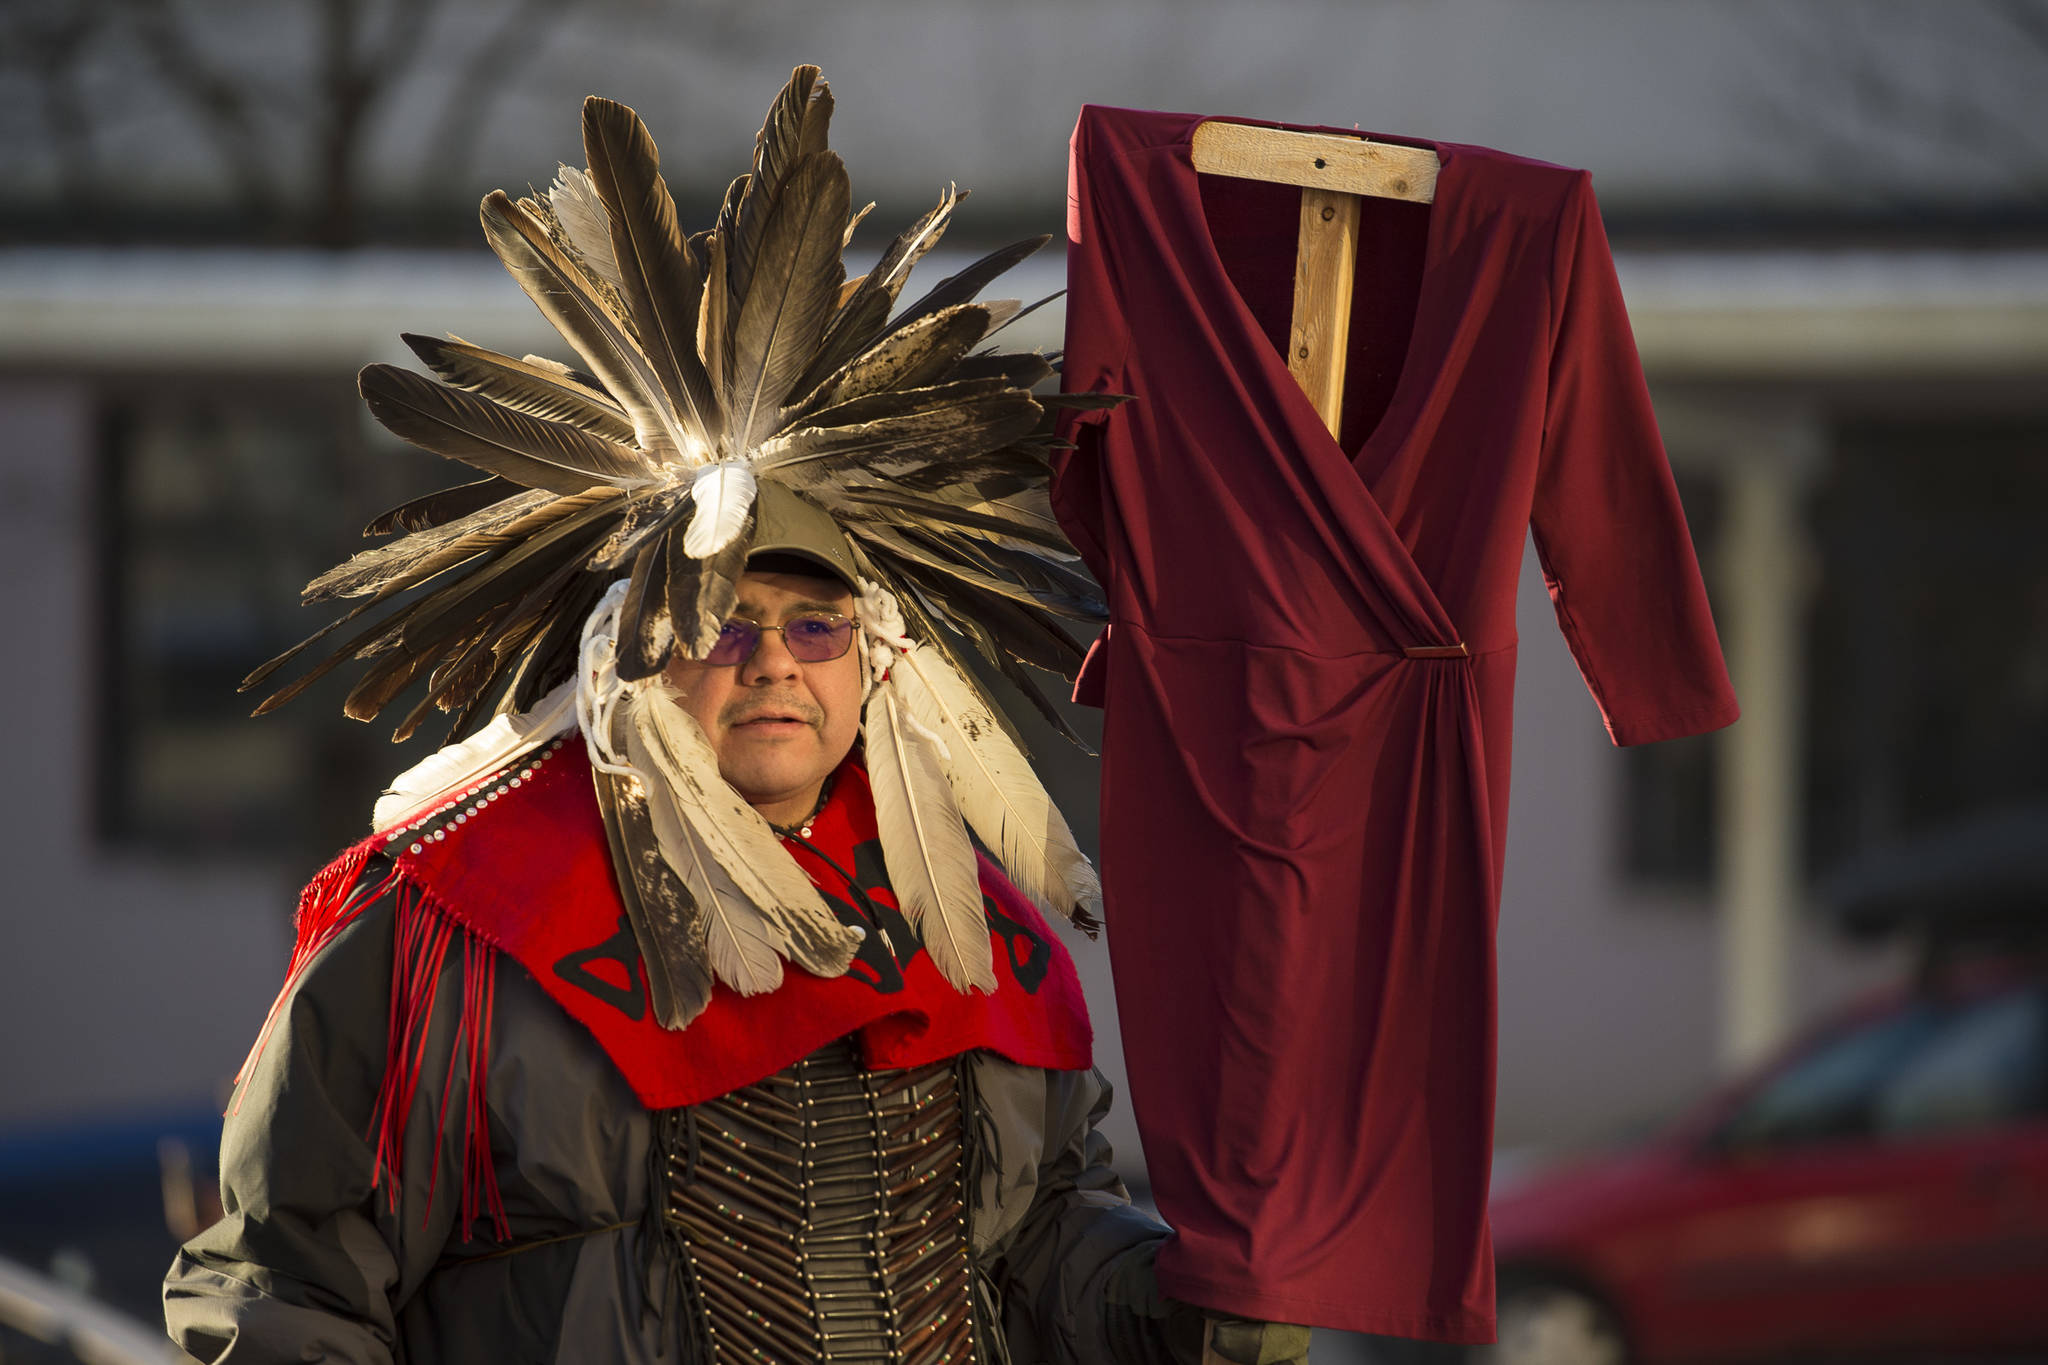 Justin McDonald attends with Native women holding up red dresses to symbolize missing and murdered indigenous women during the Women’s March on Juneau in front of the Alaska State Capitol on Saturday, Jan. 19, 2019. (Michael Penn | Juneau Empire)